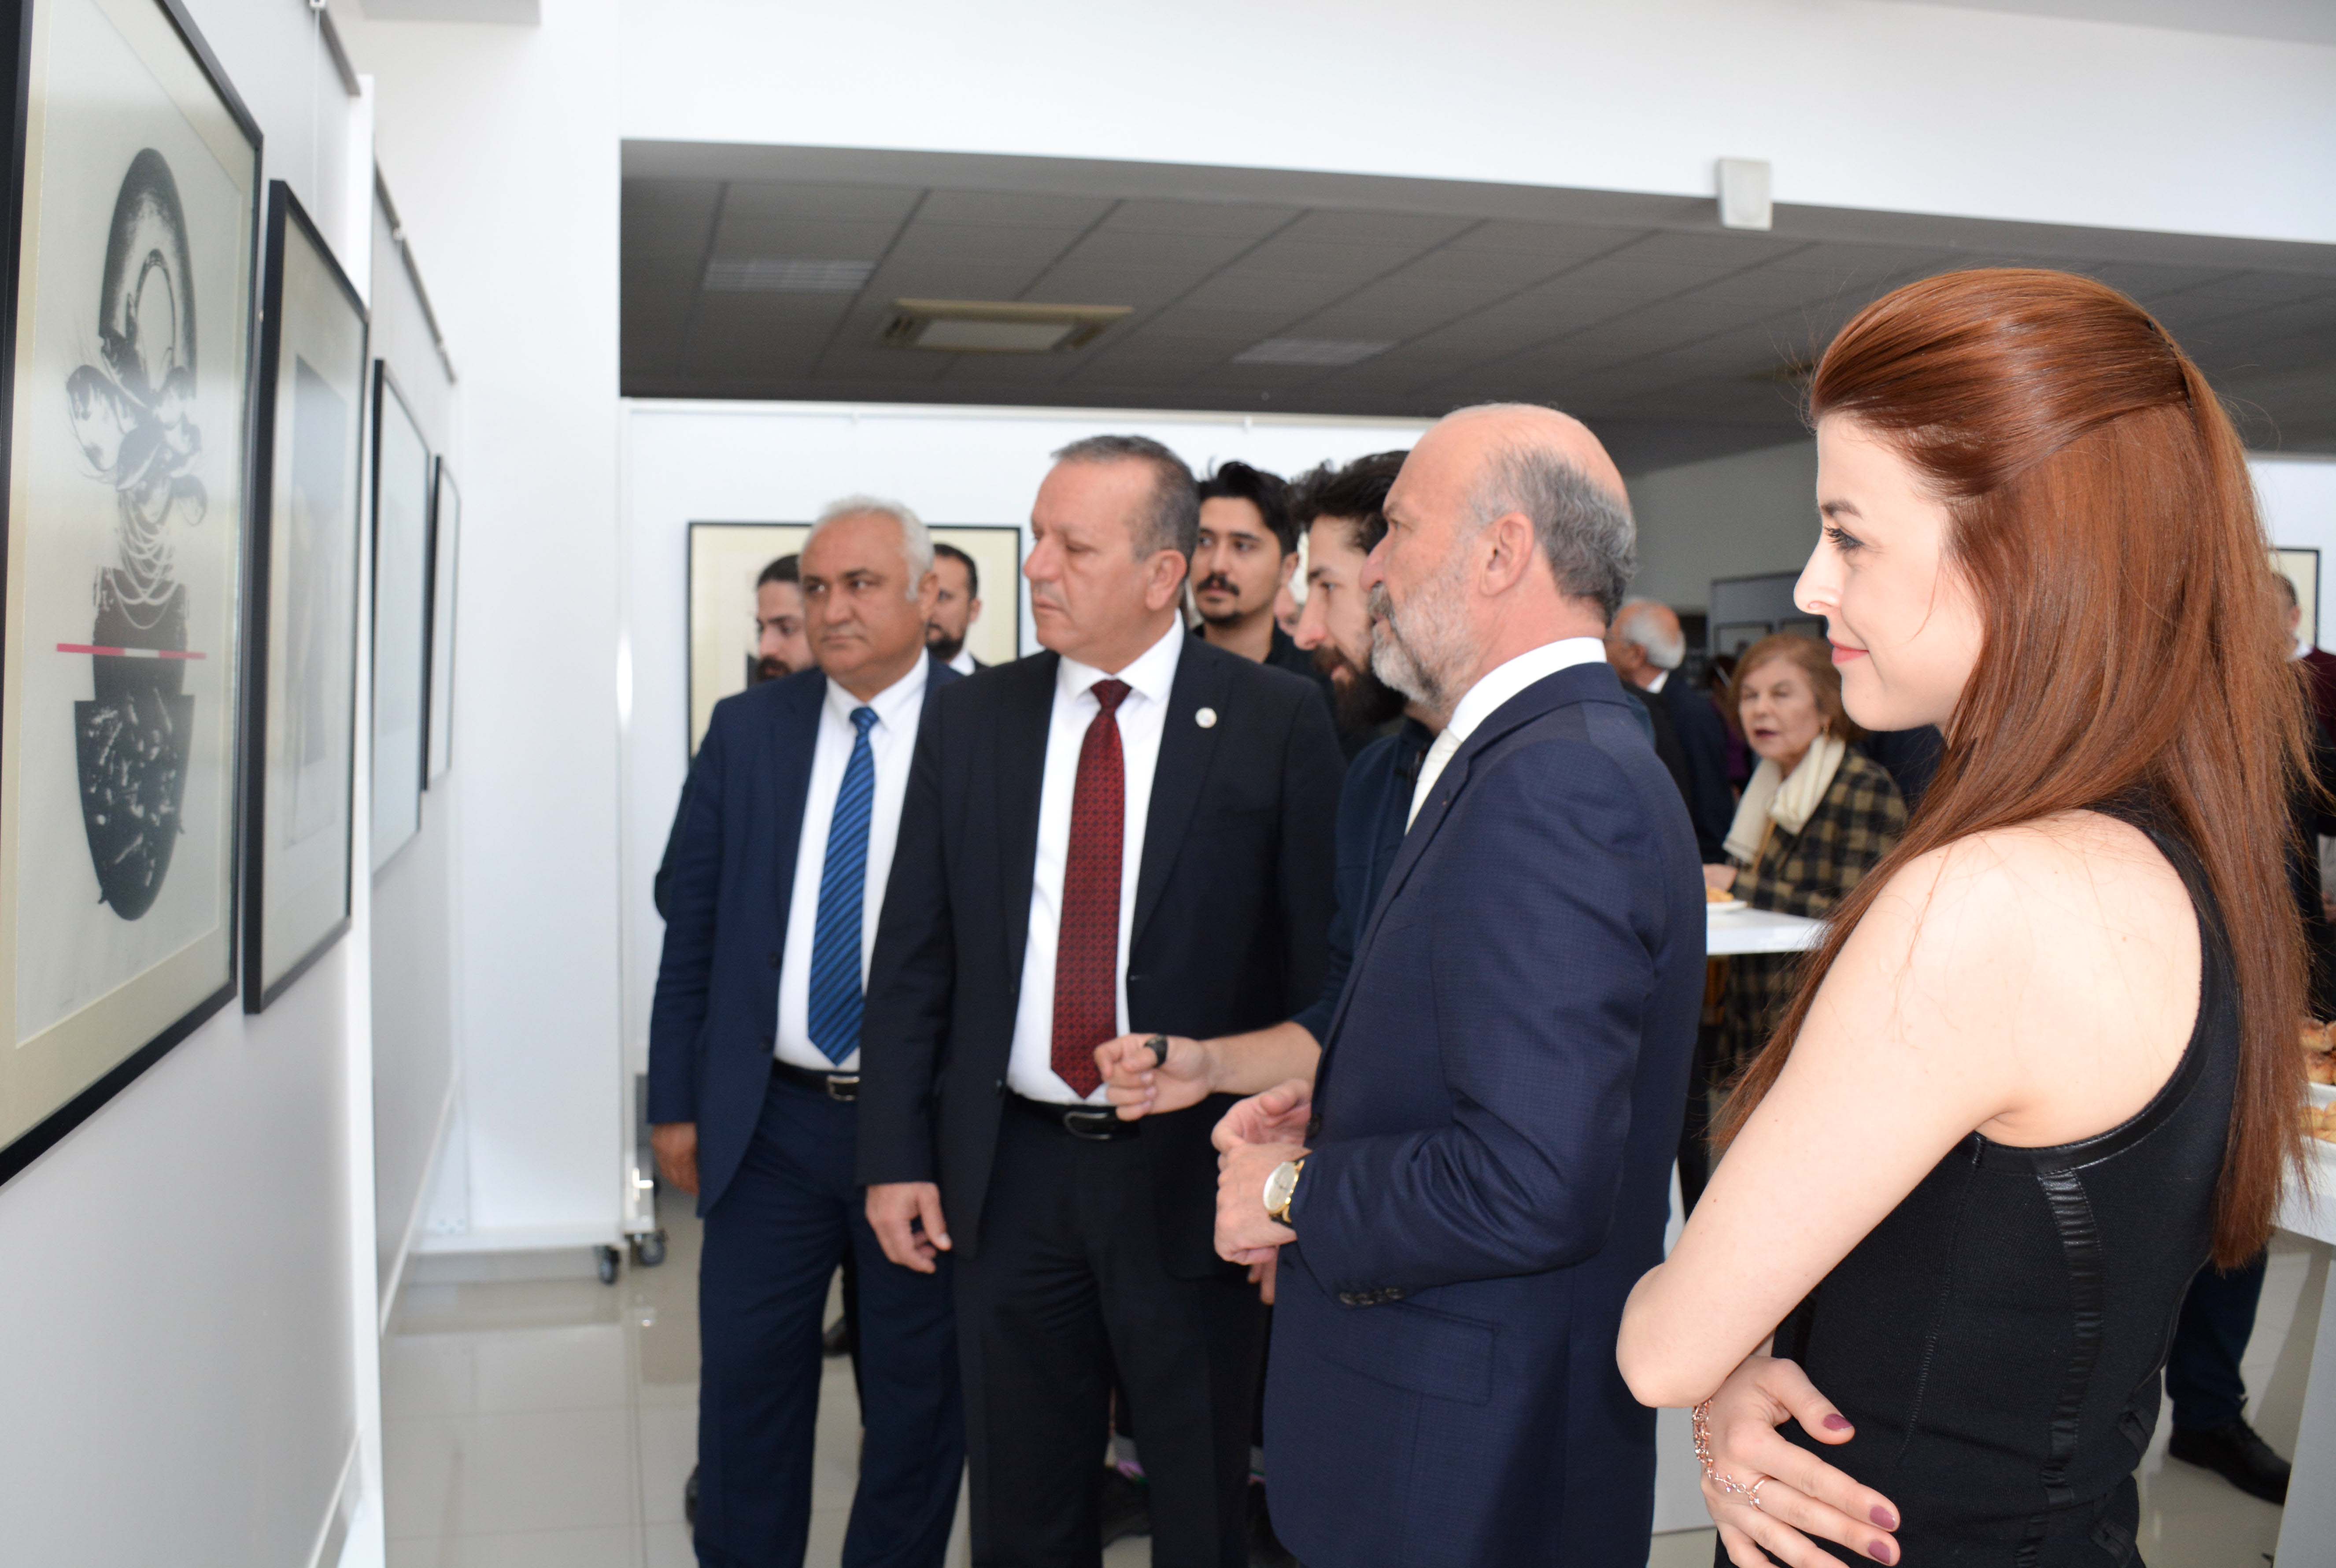 “Turkey Printmaking Artists Exhibition” consisting of 60 artworks of 7 Young Generation Artists opened by the Minister of Tourism and Environment Fikri Ataoğlu